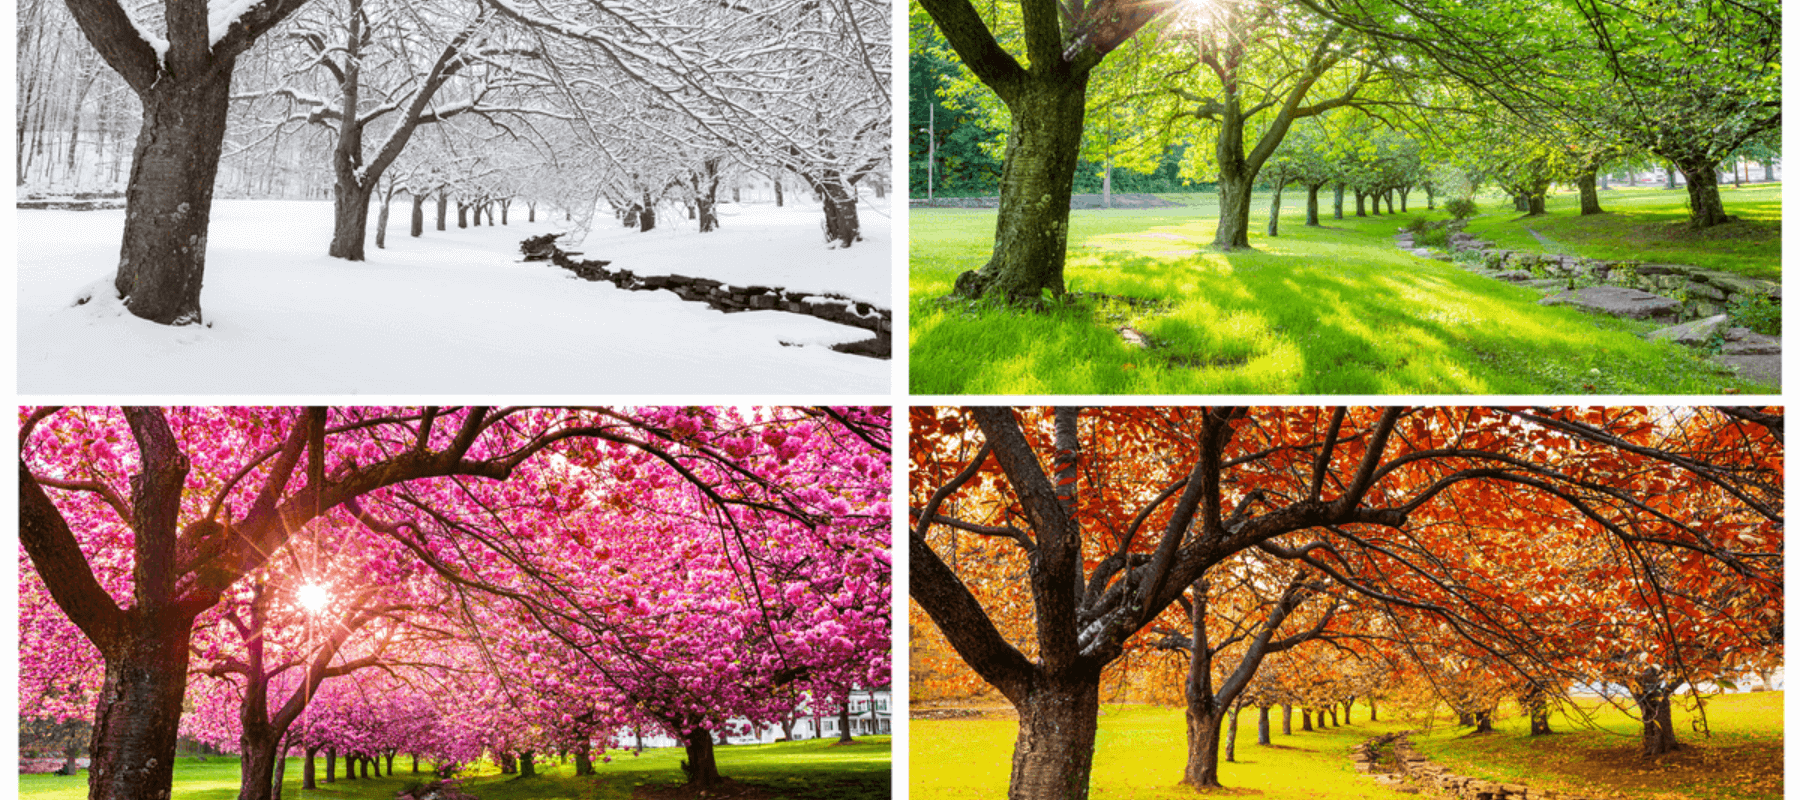 Four seasons; winter, autumn, spring, and summer